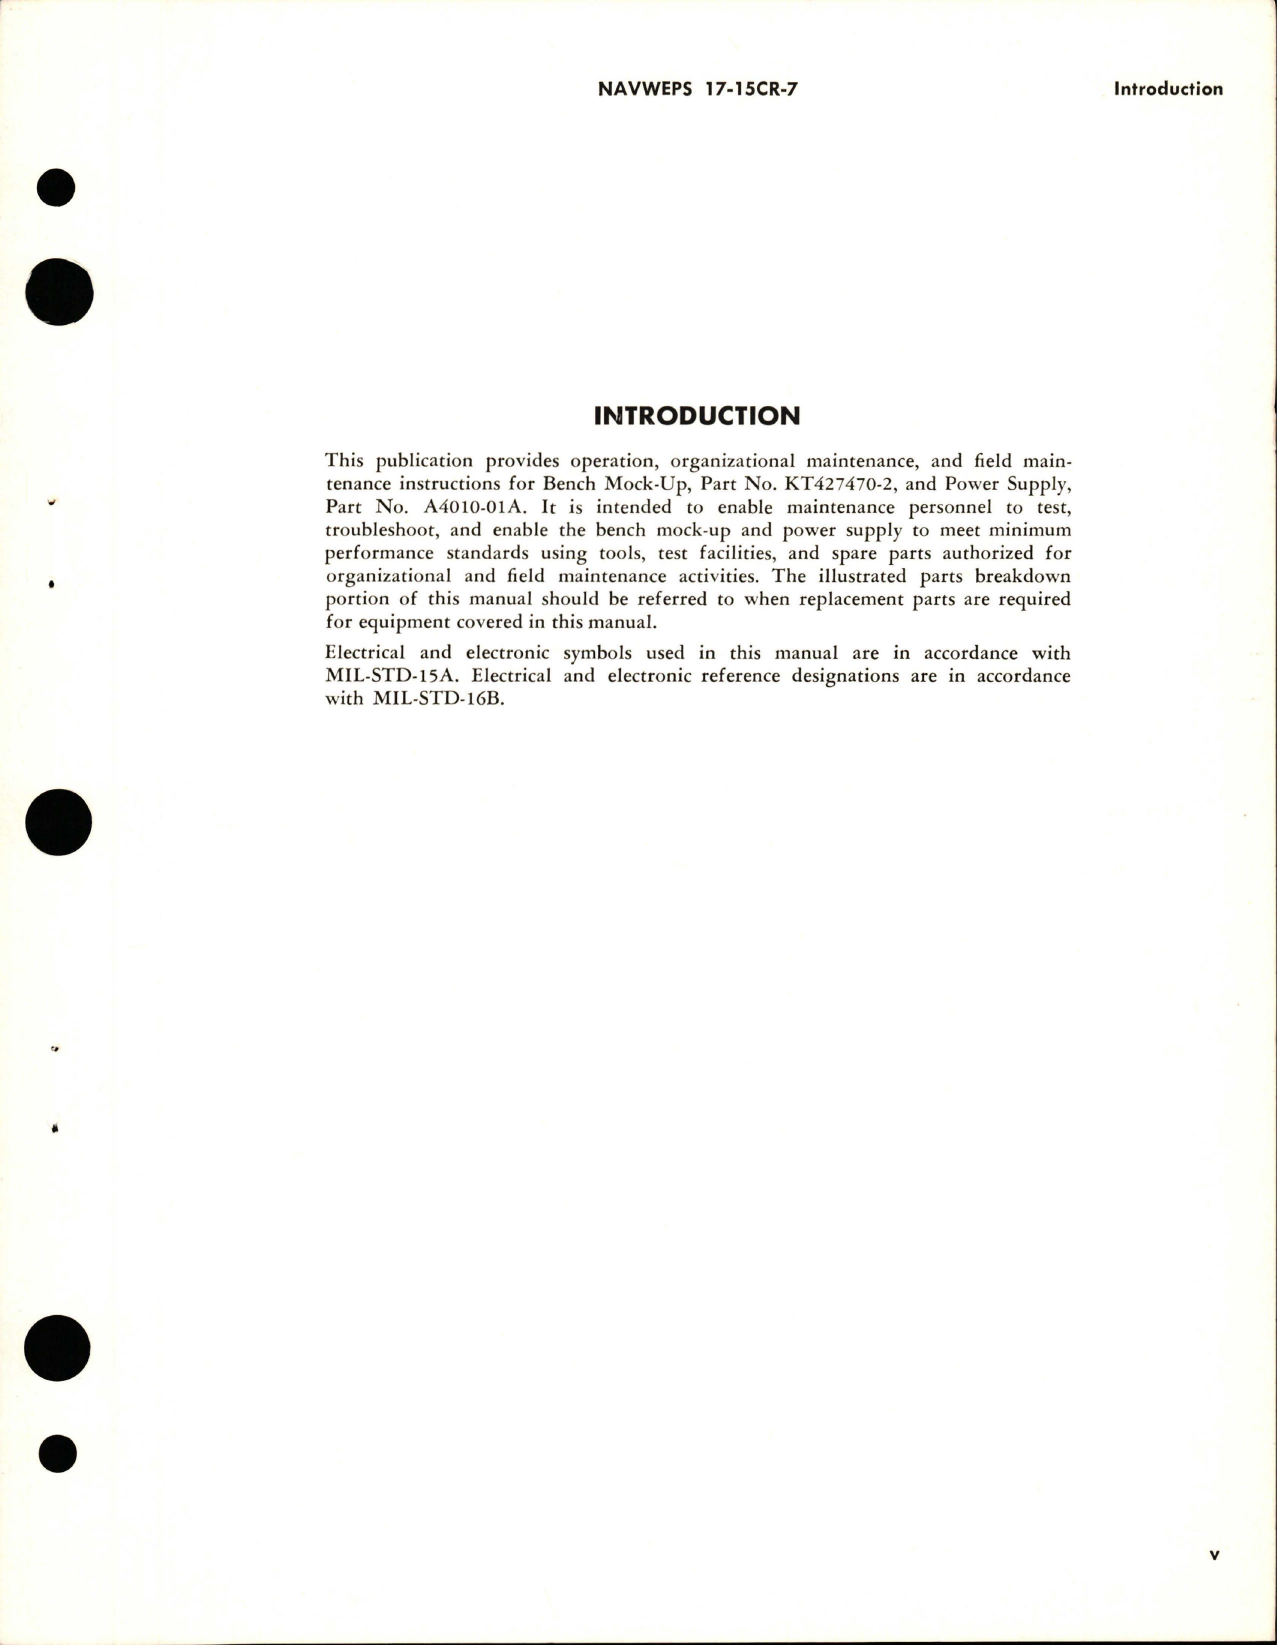 Sample page 7 from AirCorps Library document: Operation, Service Instructions with Illustrated Parts Breakdown for Bench Mock-Up - Part KT427470-2 and Power Supply - Part A4010-01A